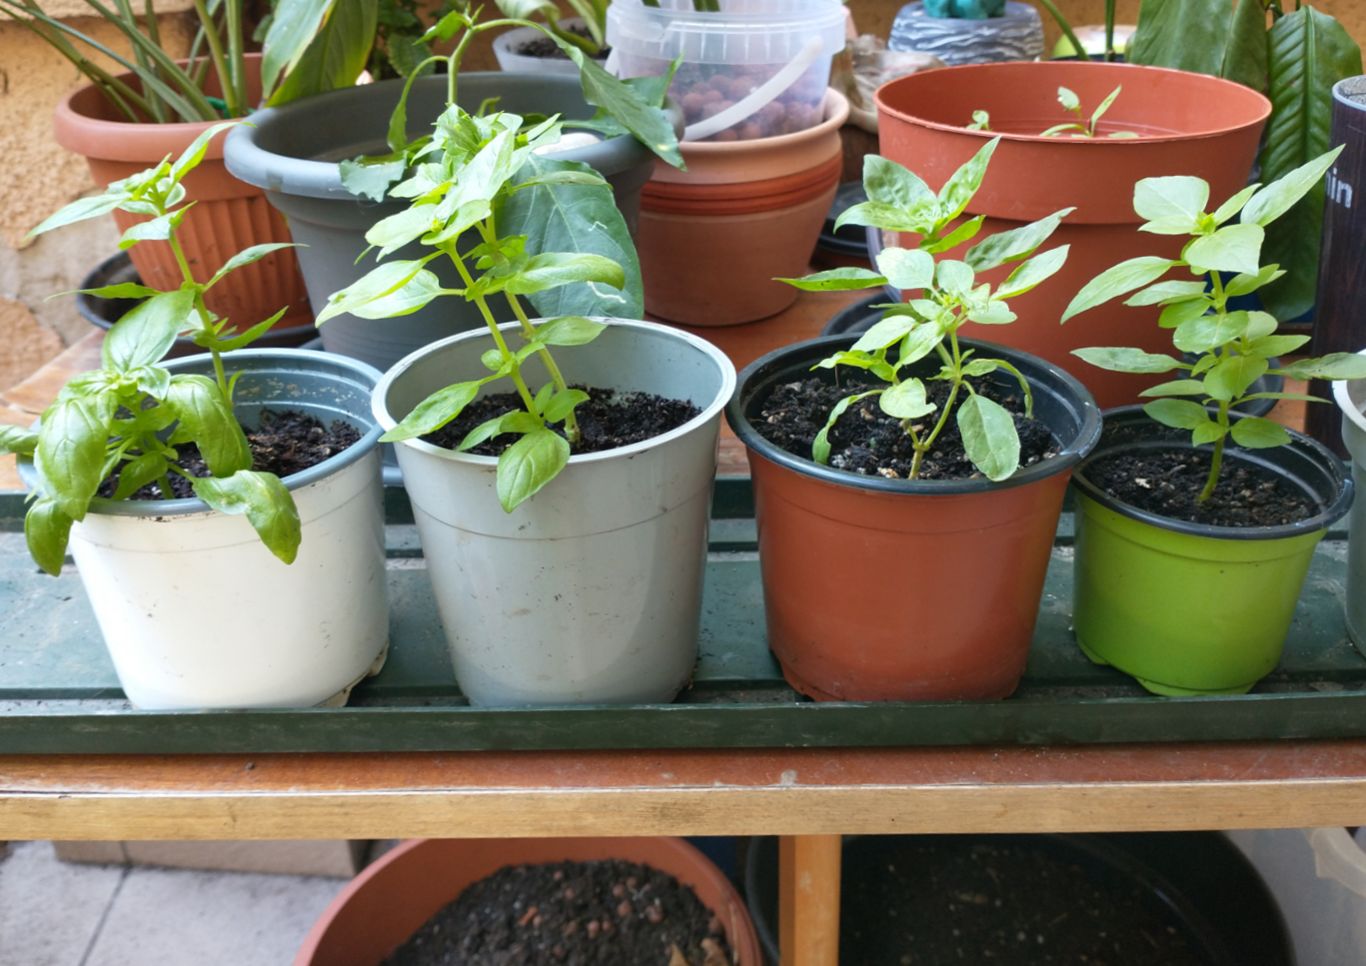 Four or five basil plants, all cuttings from the same starting basil.